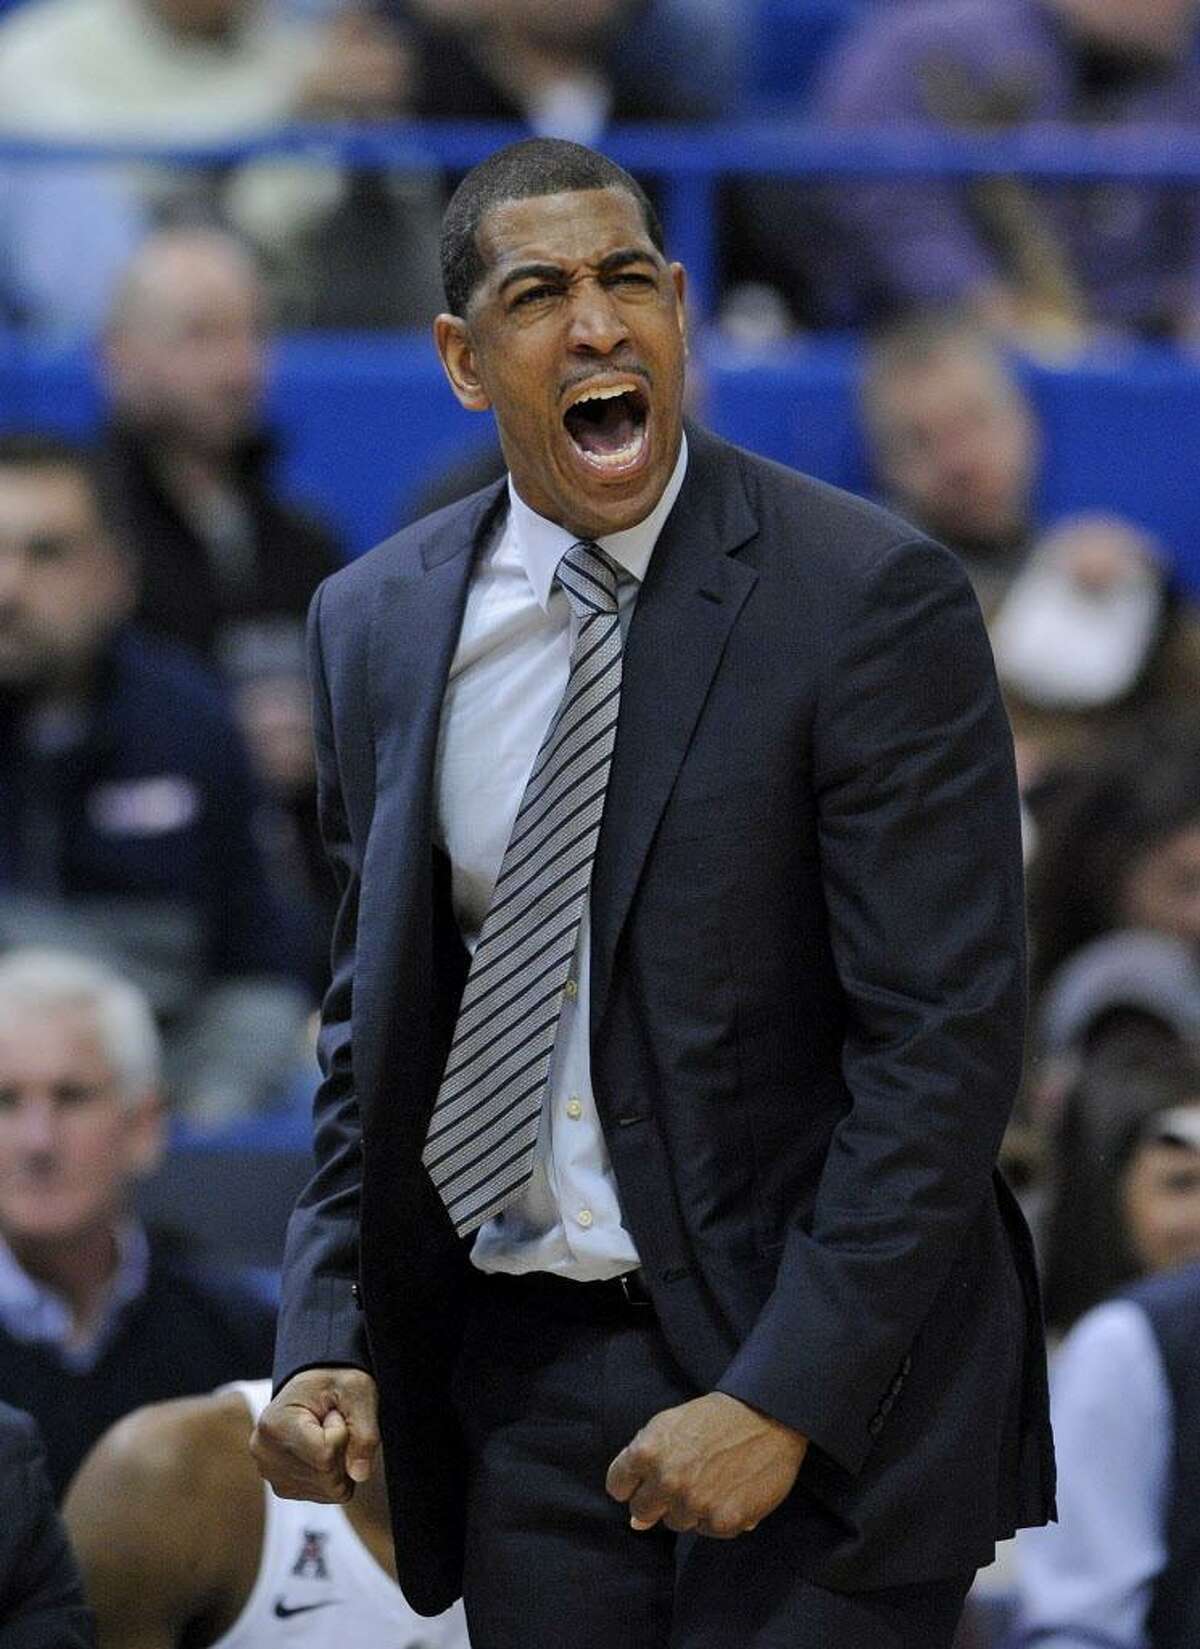 UConn coach Kevin Ollie reacts during overtime of a Dec. 23 game against Auburn. Though the Huskies finished 16-17 last season, observers don’t feel his job is in jeopardy just yet.